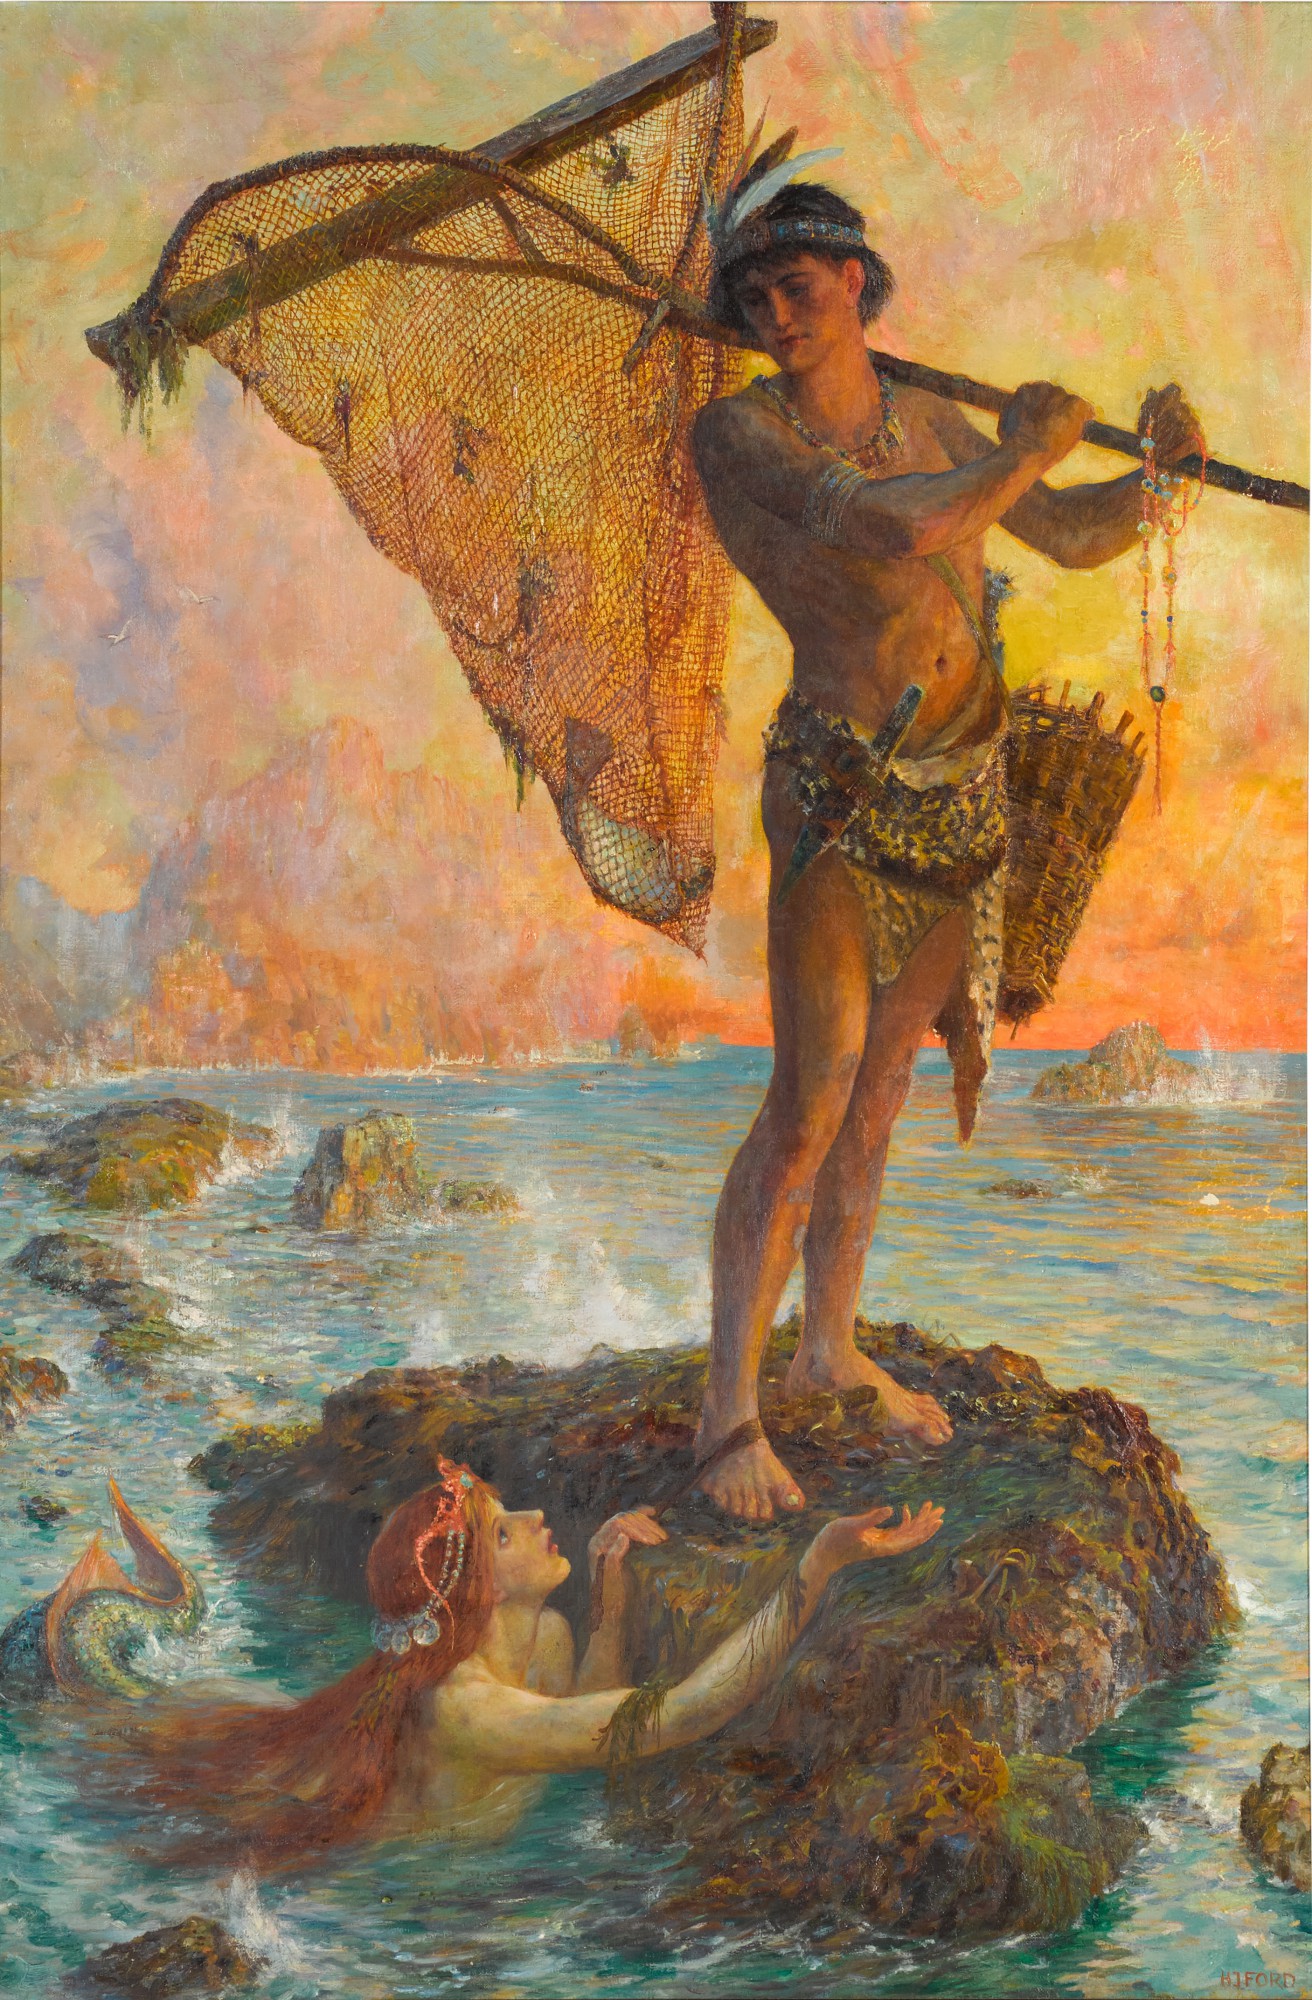 A man with a fishing net standing on a rock in the ocean while looking over his shoulder where a mermaid approaches him in the waters below